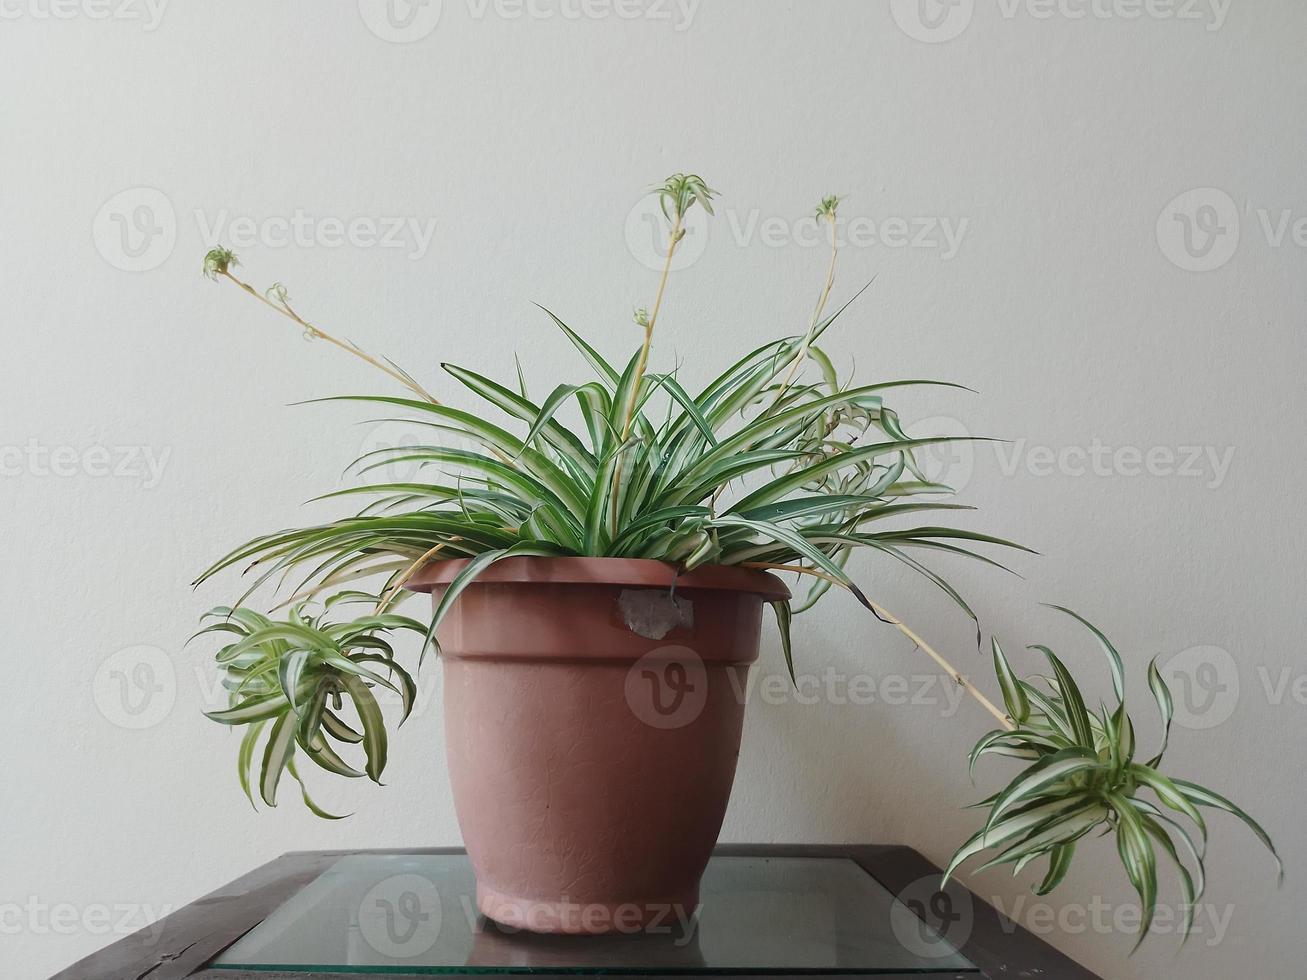 Spider Plants In a Brown Pot at House photo